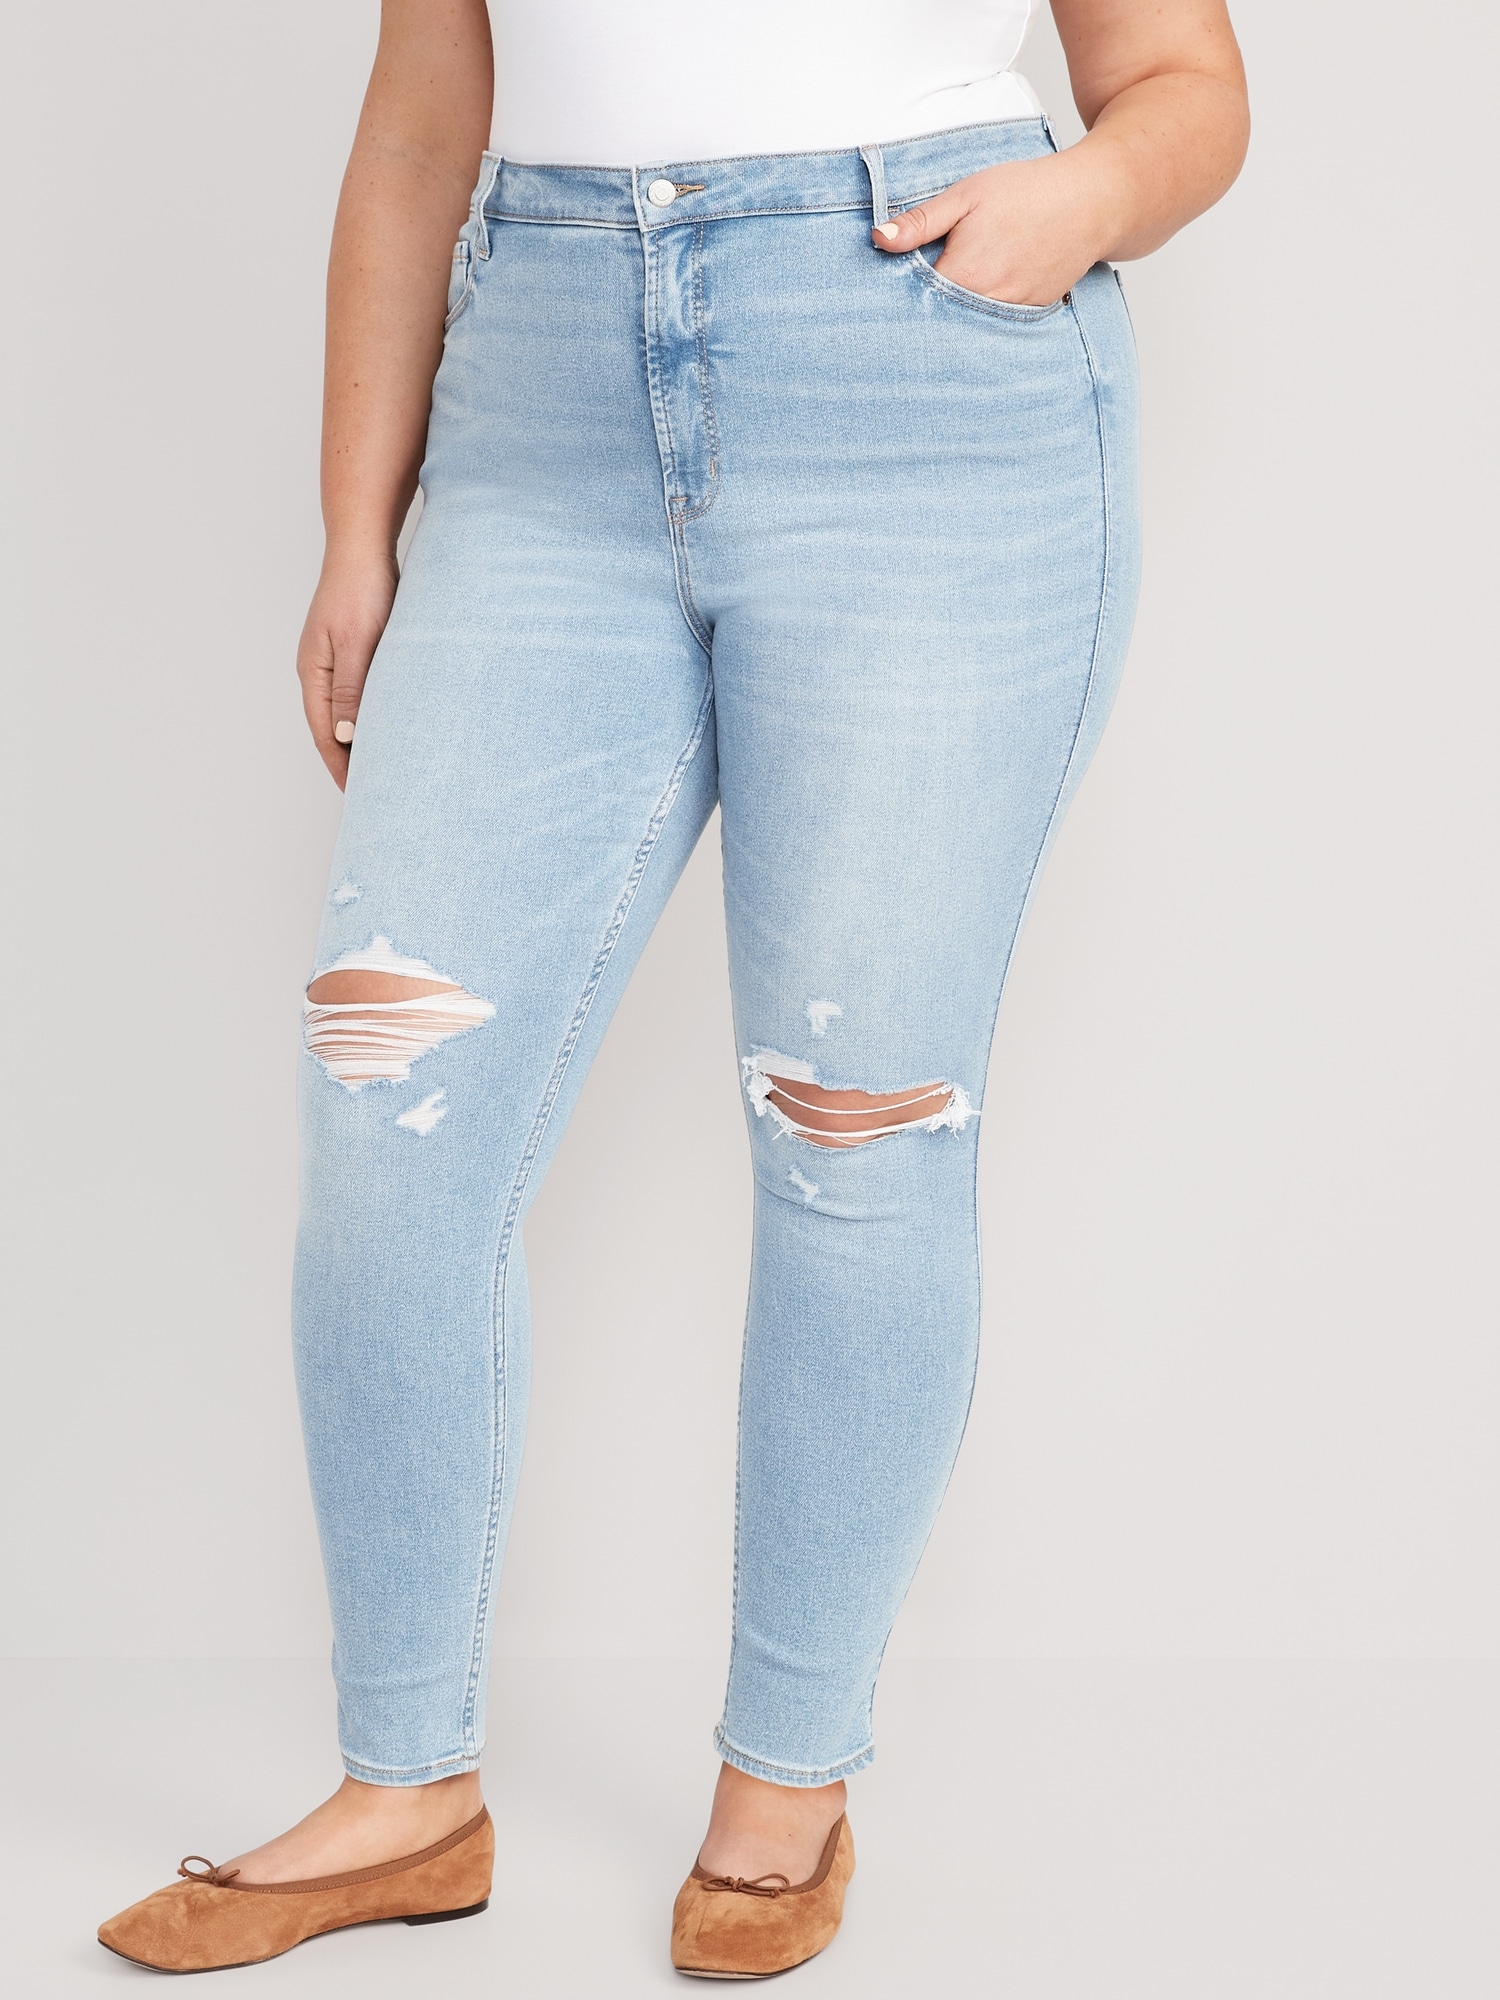 Extra High-Waisted | Old Jeans Women Navy Rockstar Super-Skinny Stretch 360° for